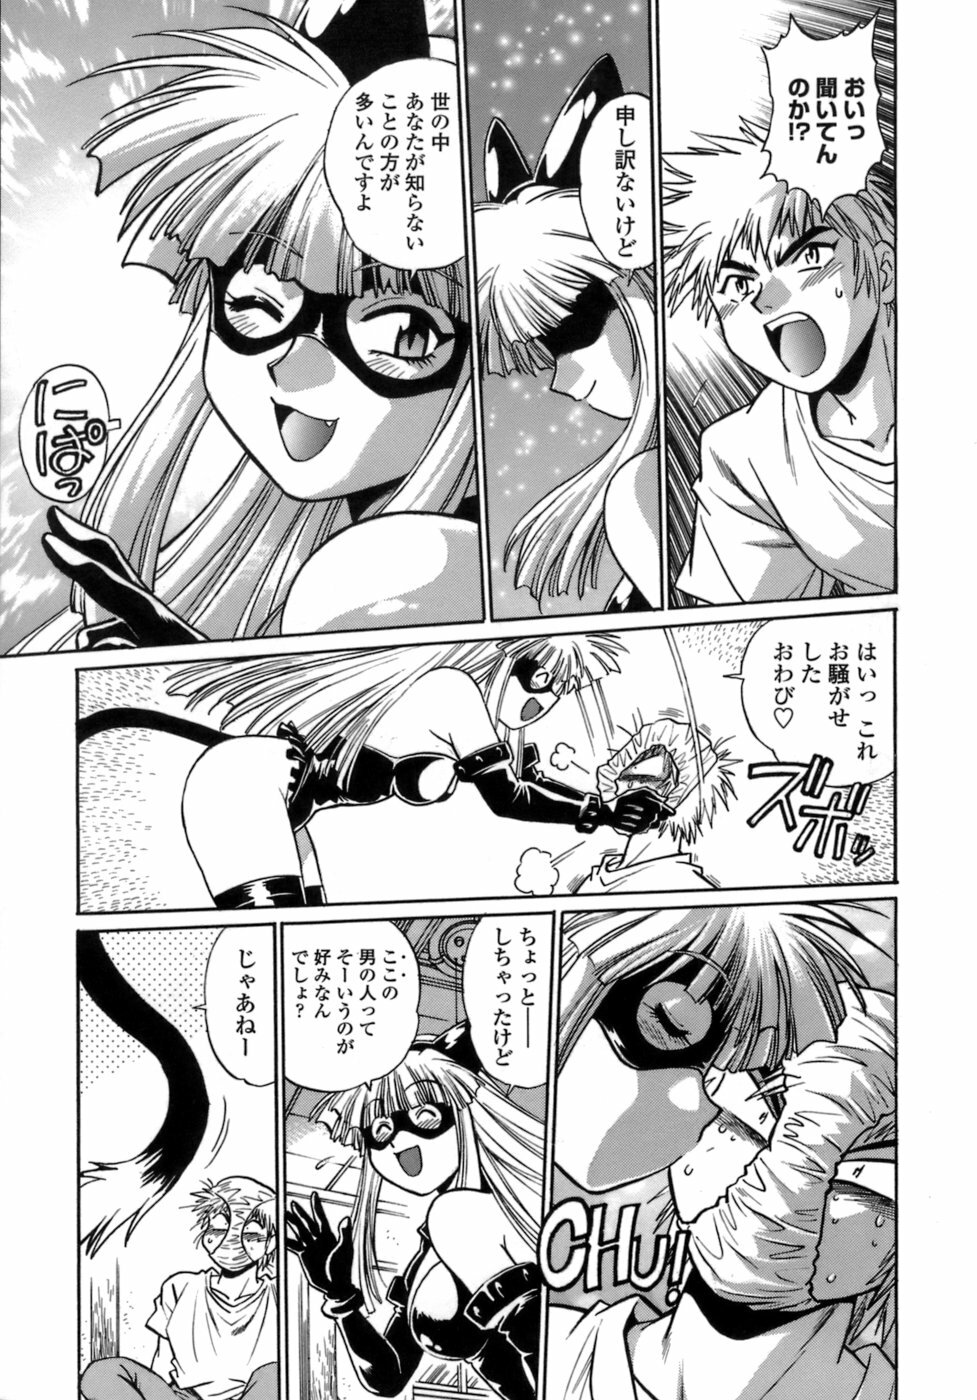 [Manabe Jouji] Tail Chaser 1 page 13 full